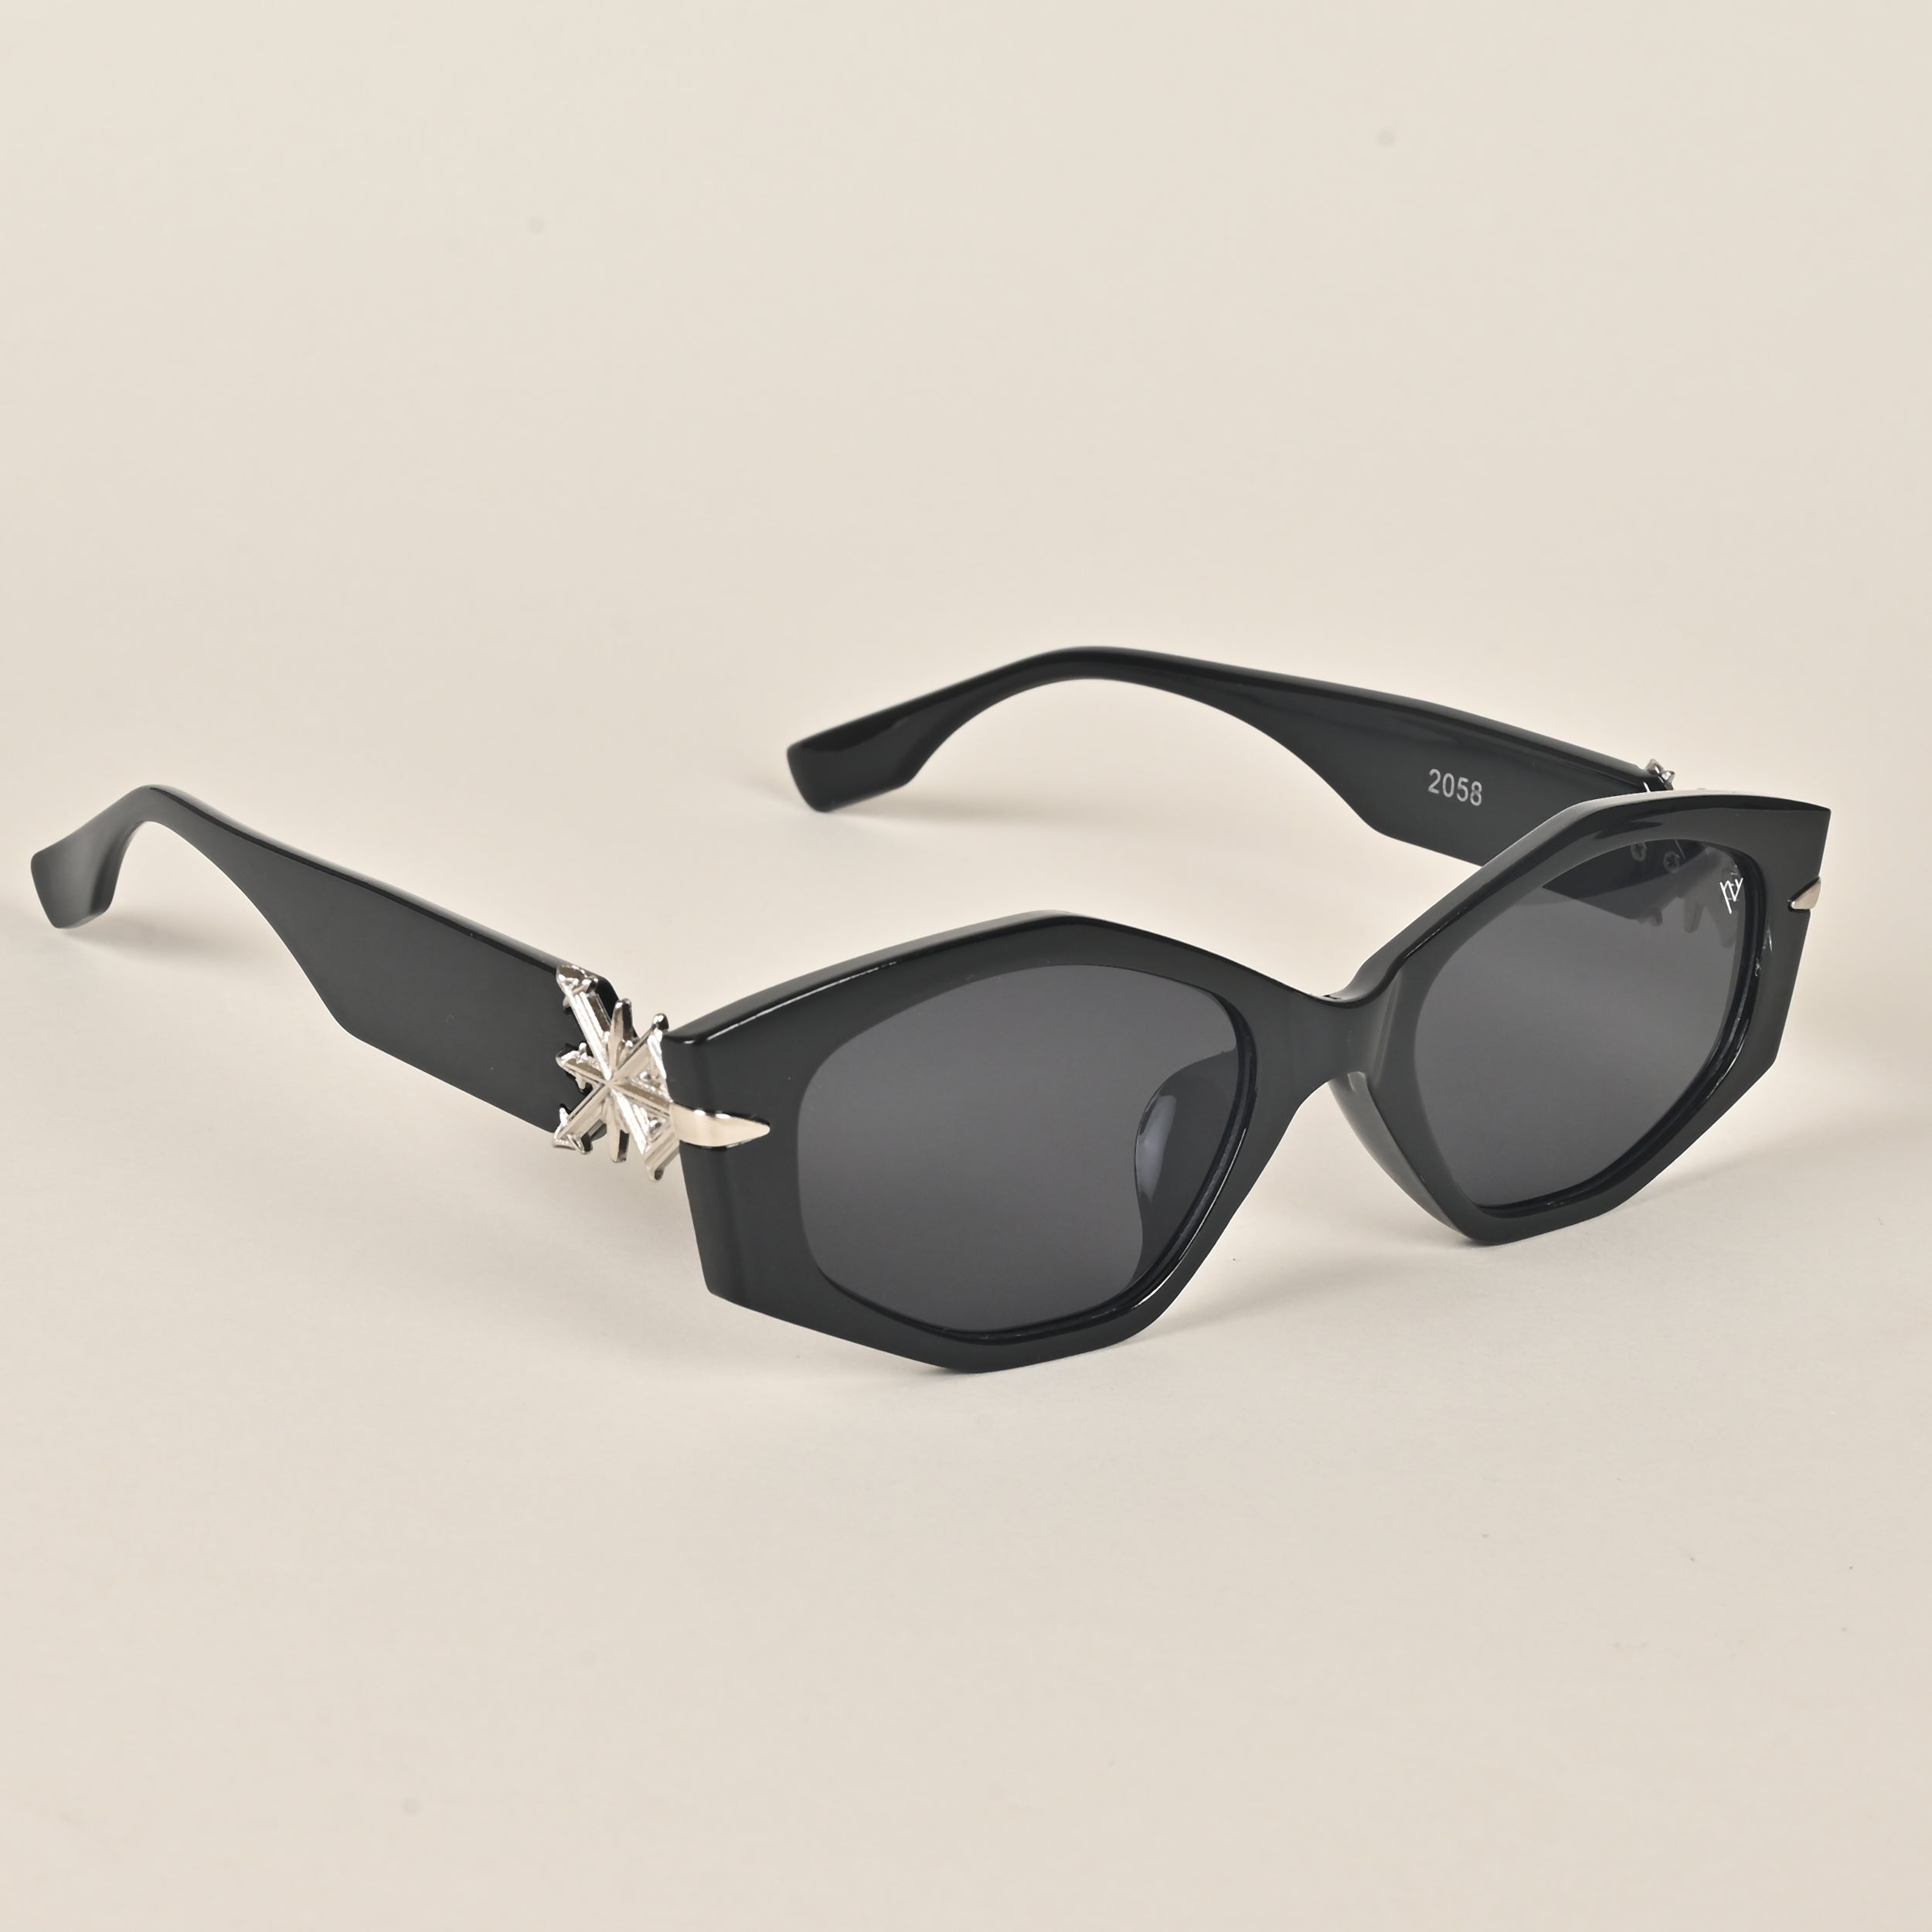 Voyage Black Oval Sunglasses for Women - MG3987